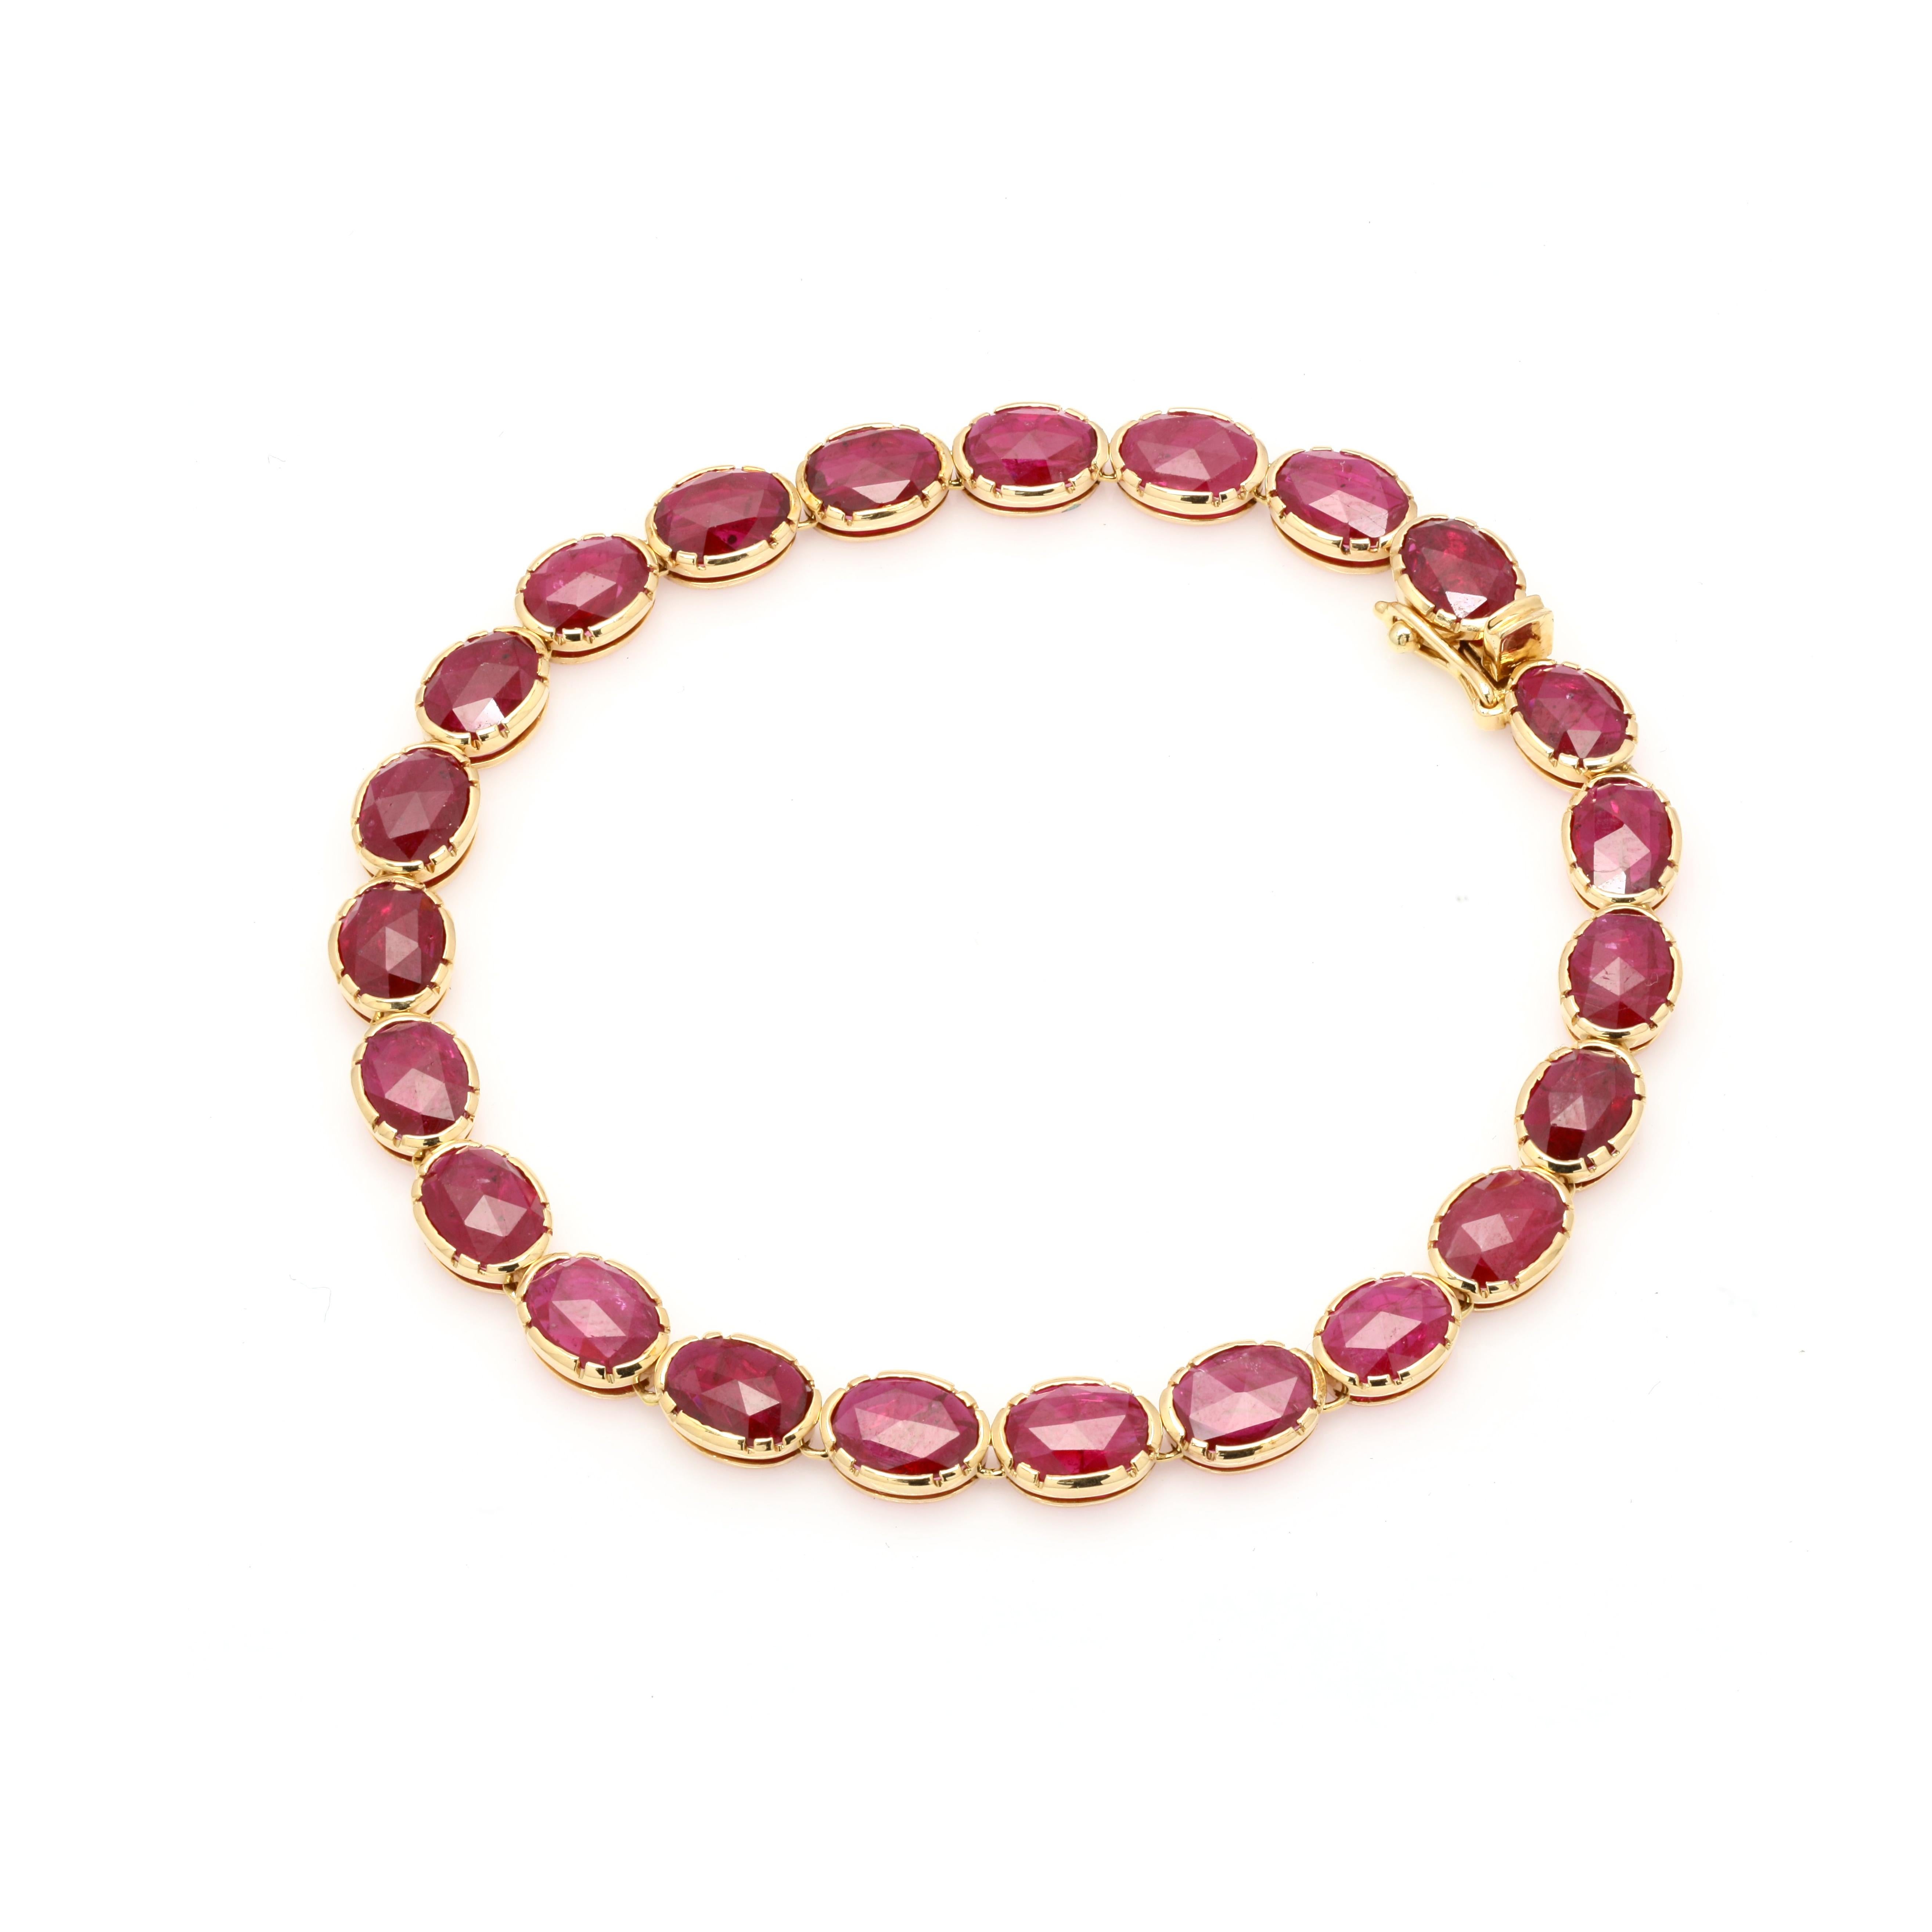 14.65 cts ruby tennis bracelet in 18K gold. It has a perfect oval cut gemstone to make you stand out on any occasion or an event.
Ruby gemstone brings name and fame. 
Featuring 14.65 cts of ruby set in 14K gold pinion bezel, this handcrafted tennis